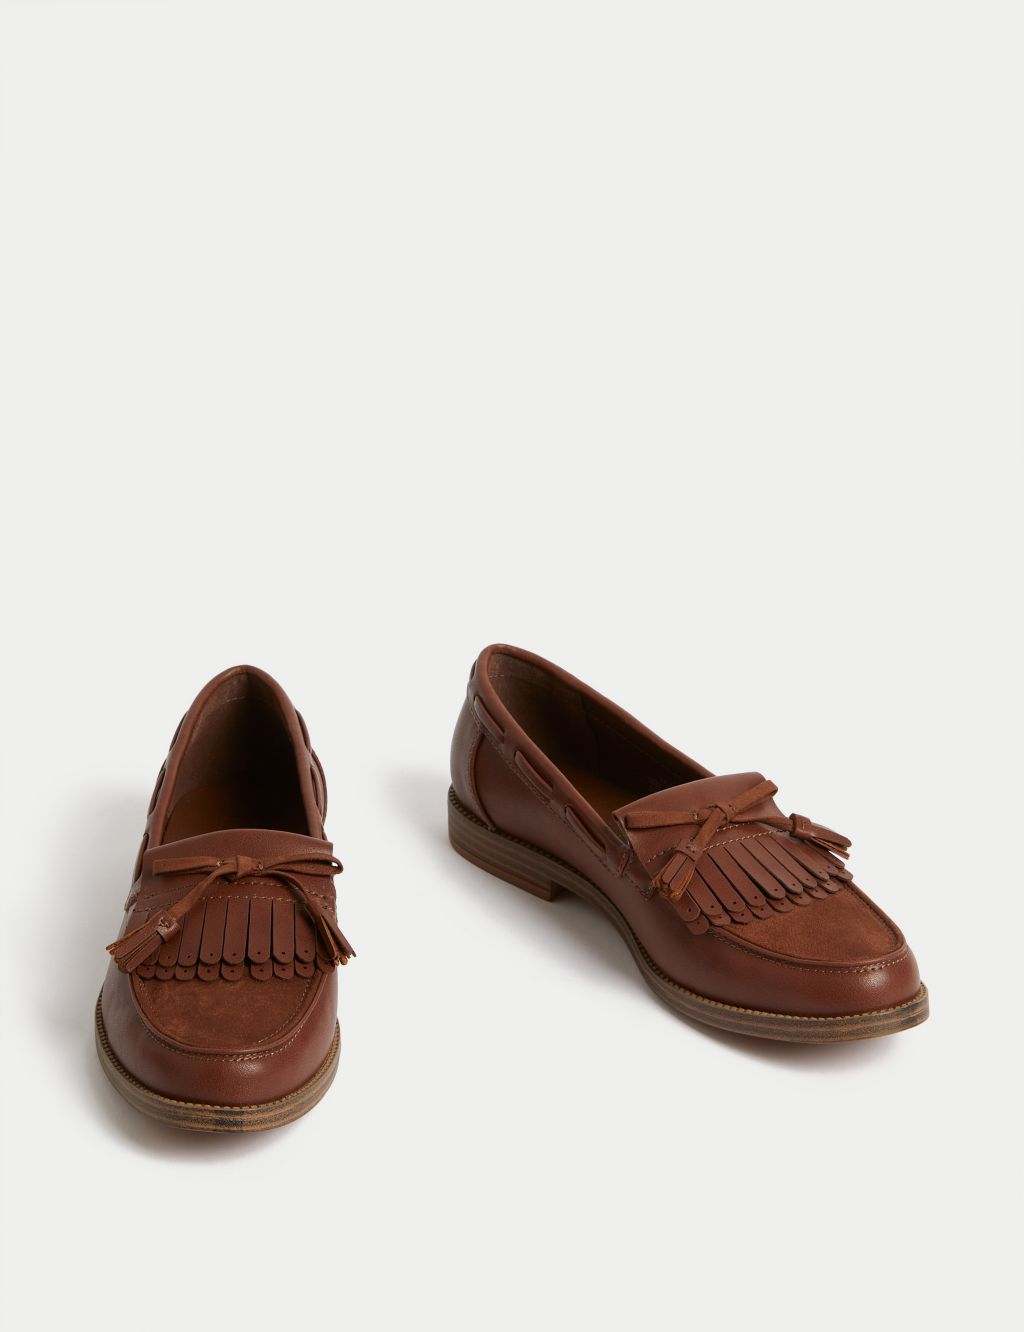 Patent Tassel Bow Loafers image 2